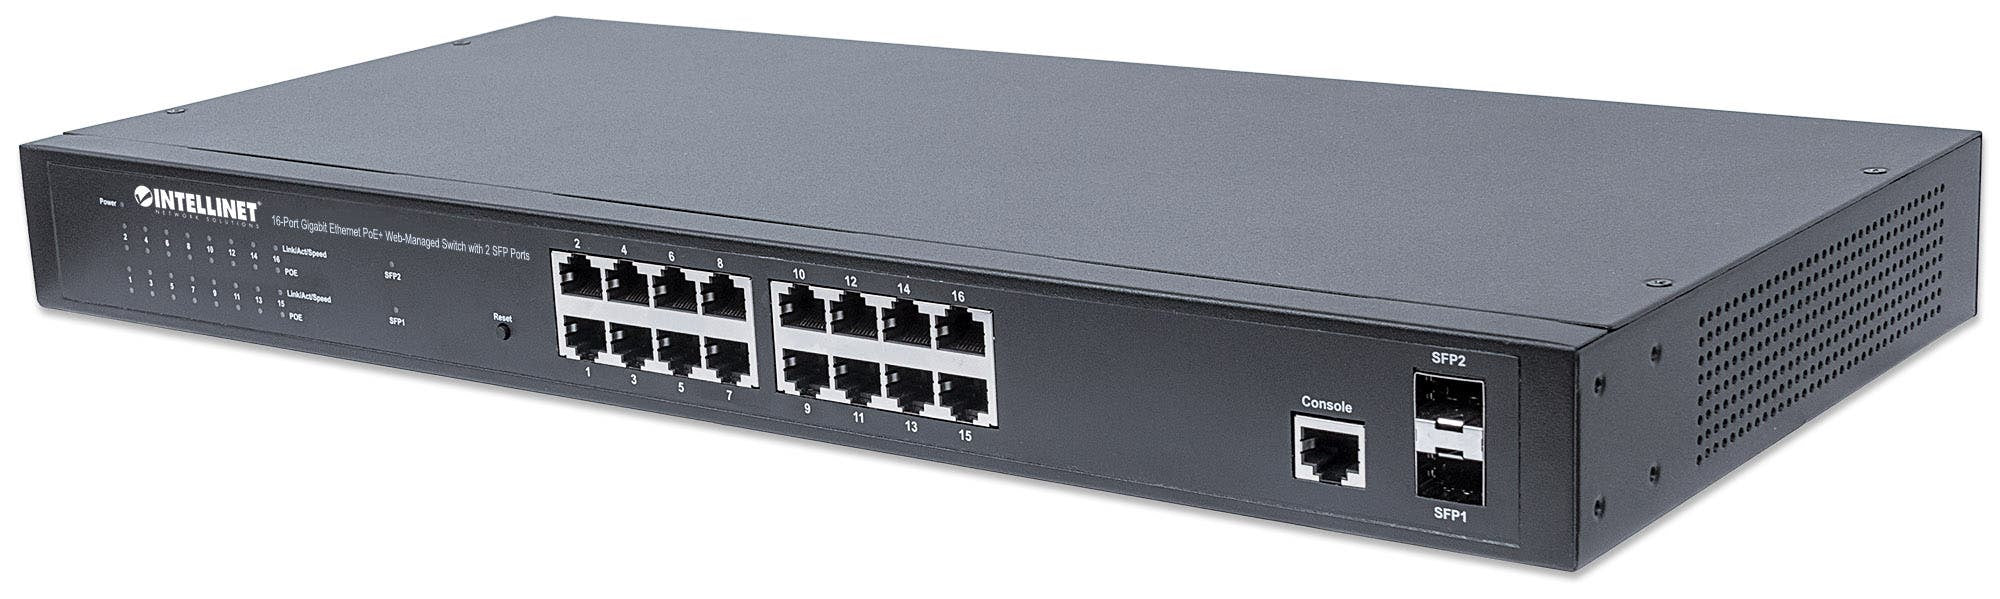 Intellinet 16-Port Gigabit Ethernet PoE+ Web-Managed Switch with 2 SFP Ports, IEEE 802.3at/af Power over Ethernet (PoE+/PoE) Compliant, 374 W, Endspan, 19" Rackmount (UK Power Cord)